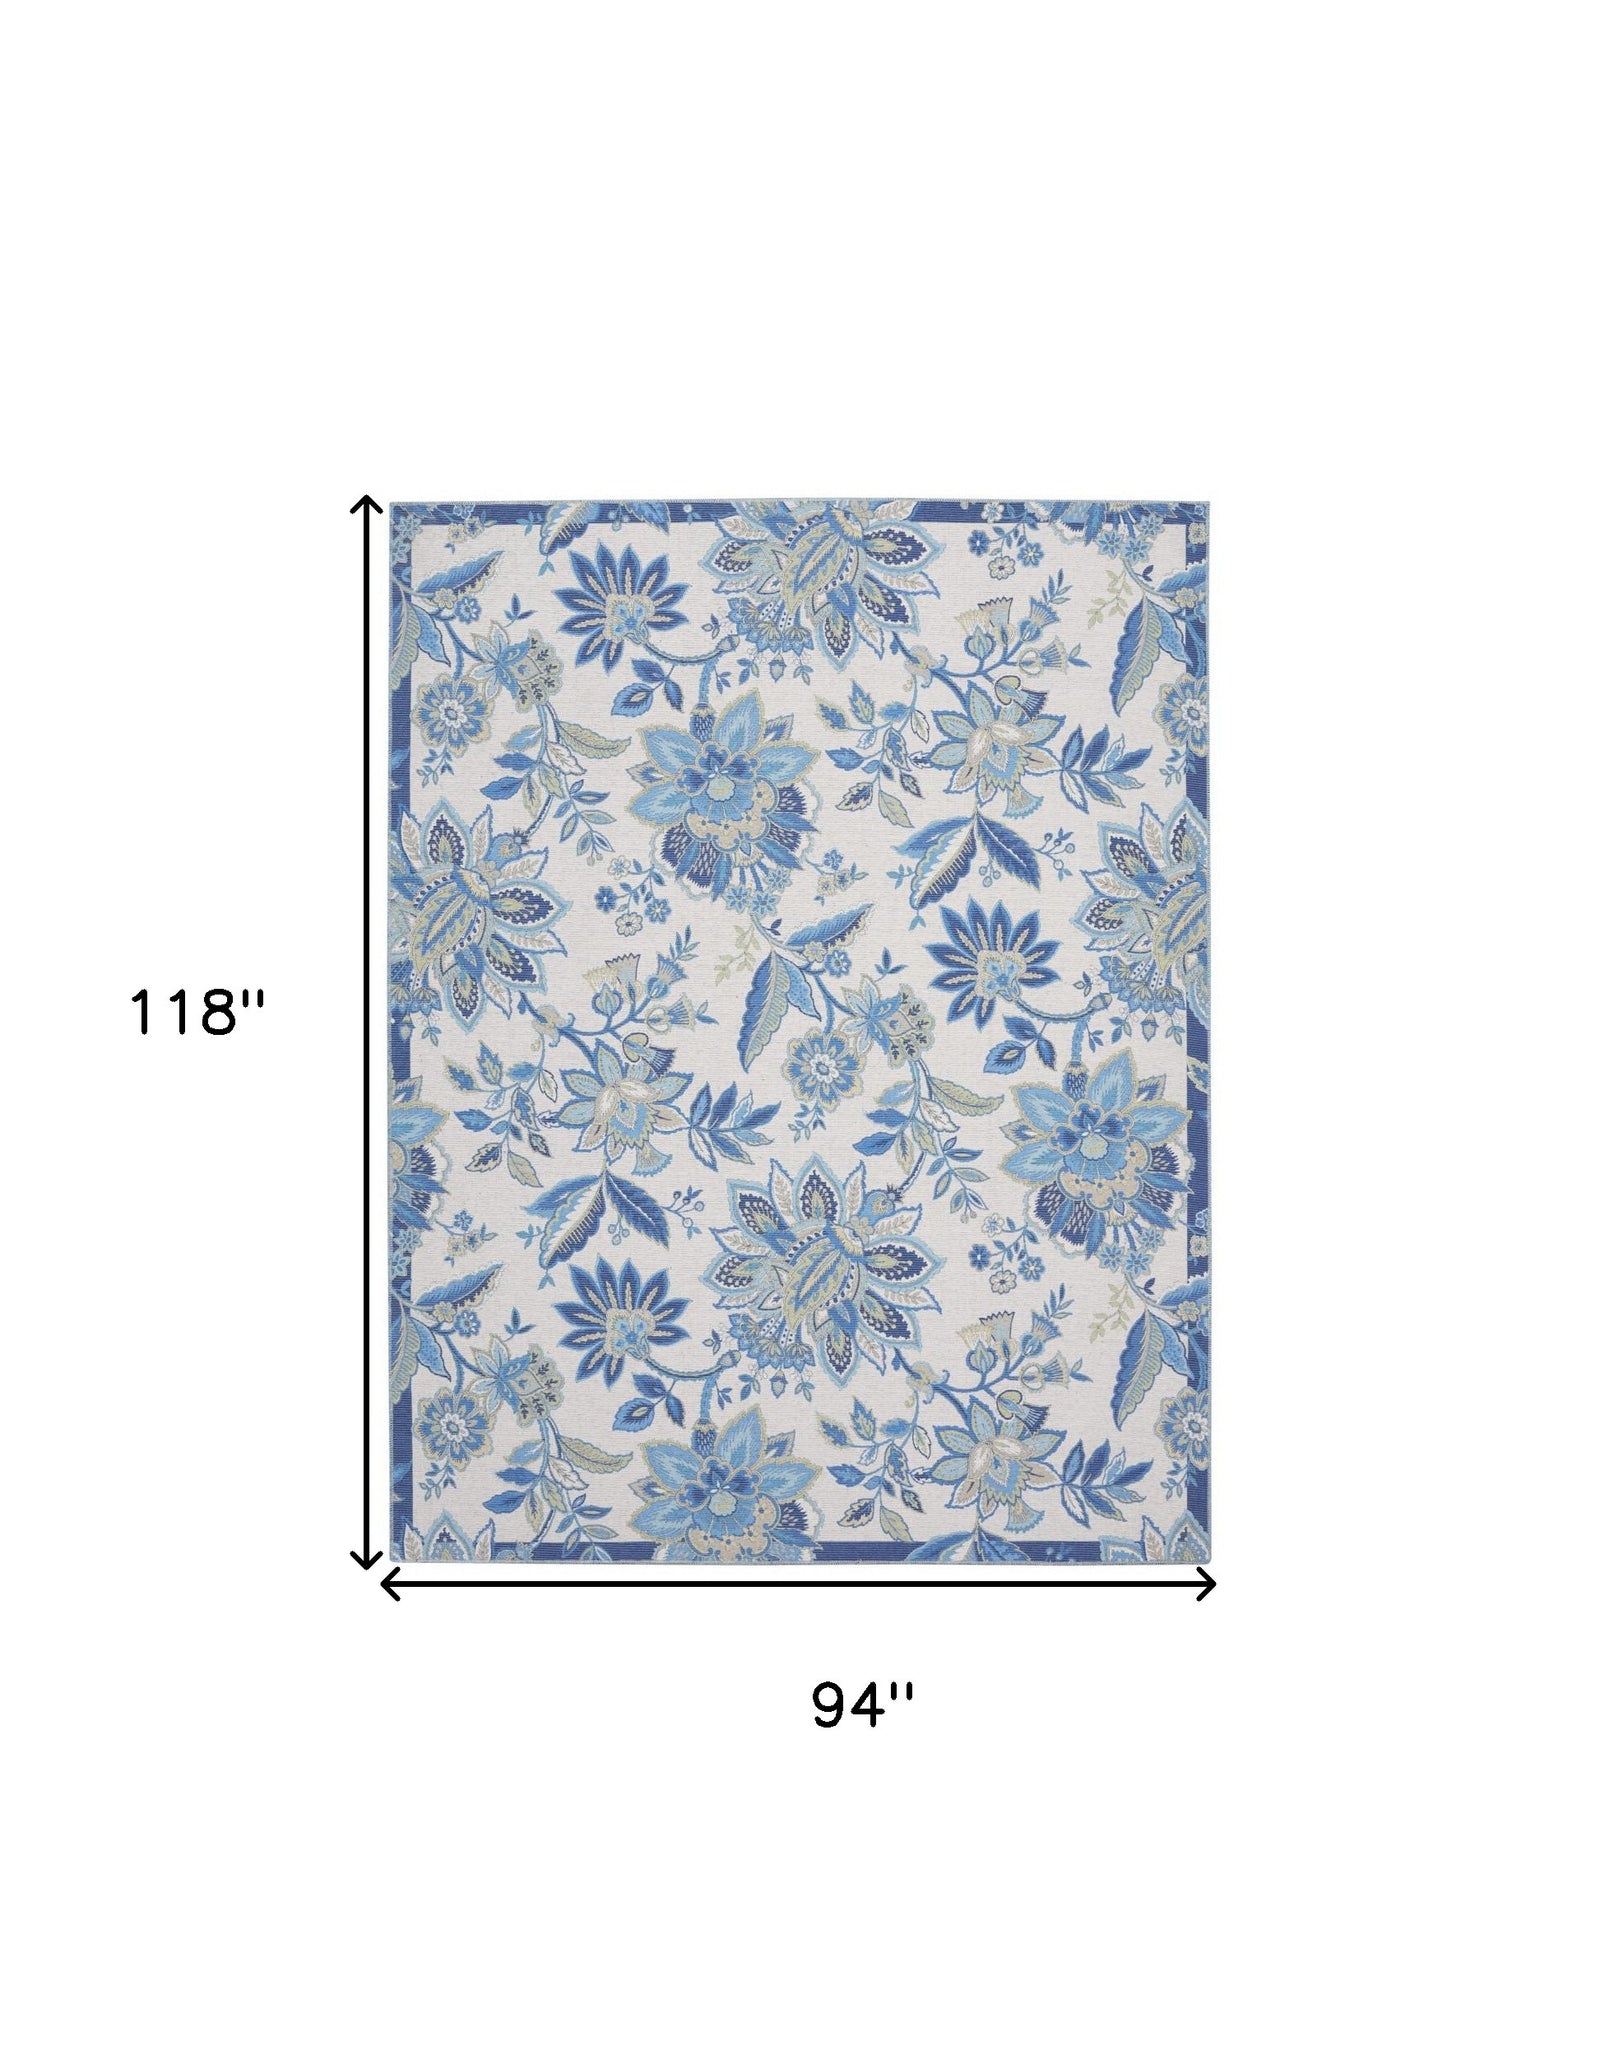 8' X 10' Ivory And Blue Floral Distressed Washable Area Rug